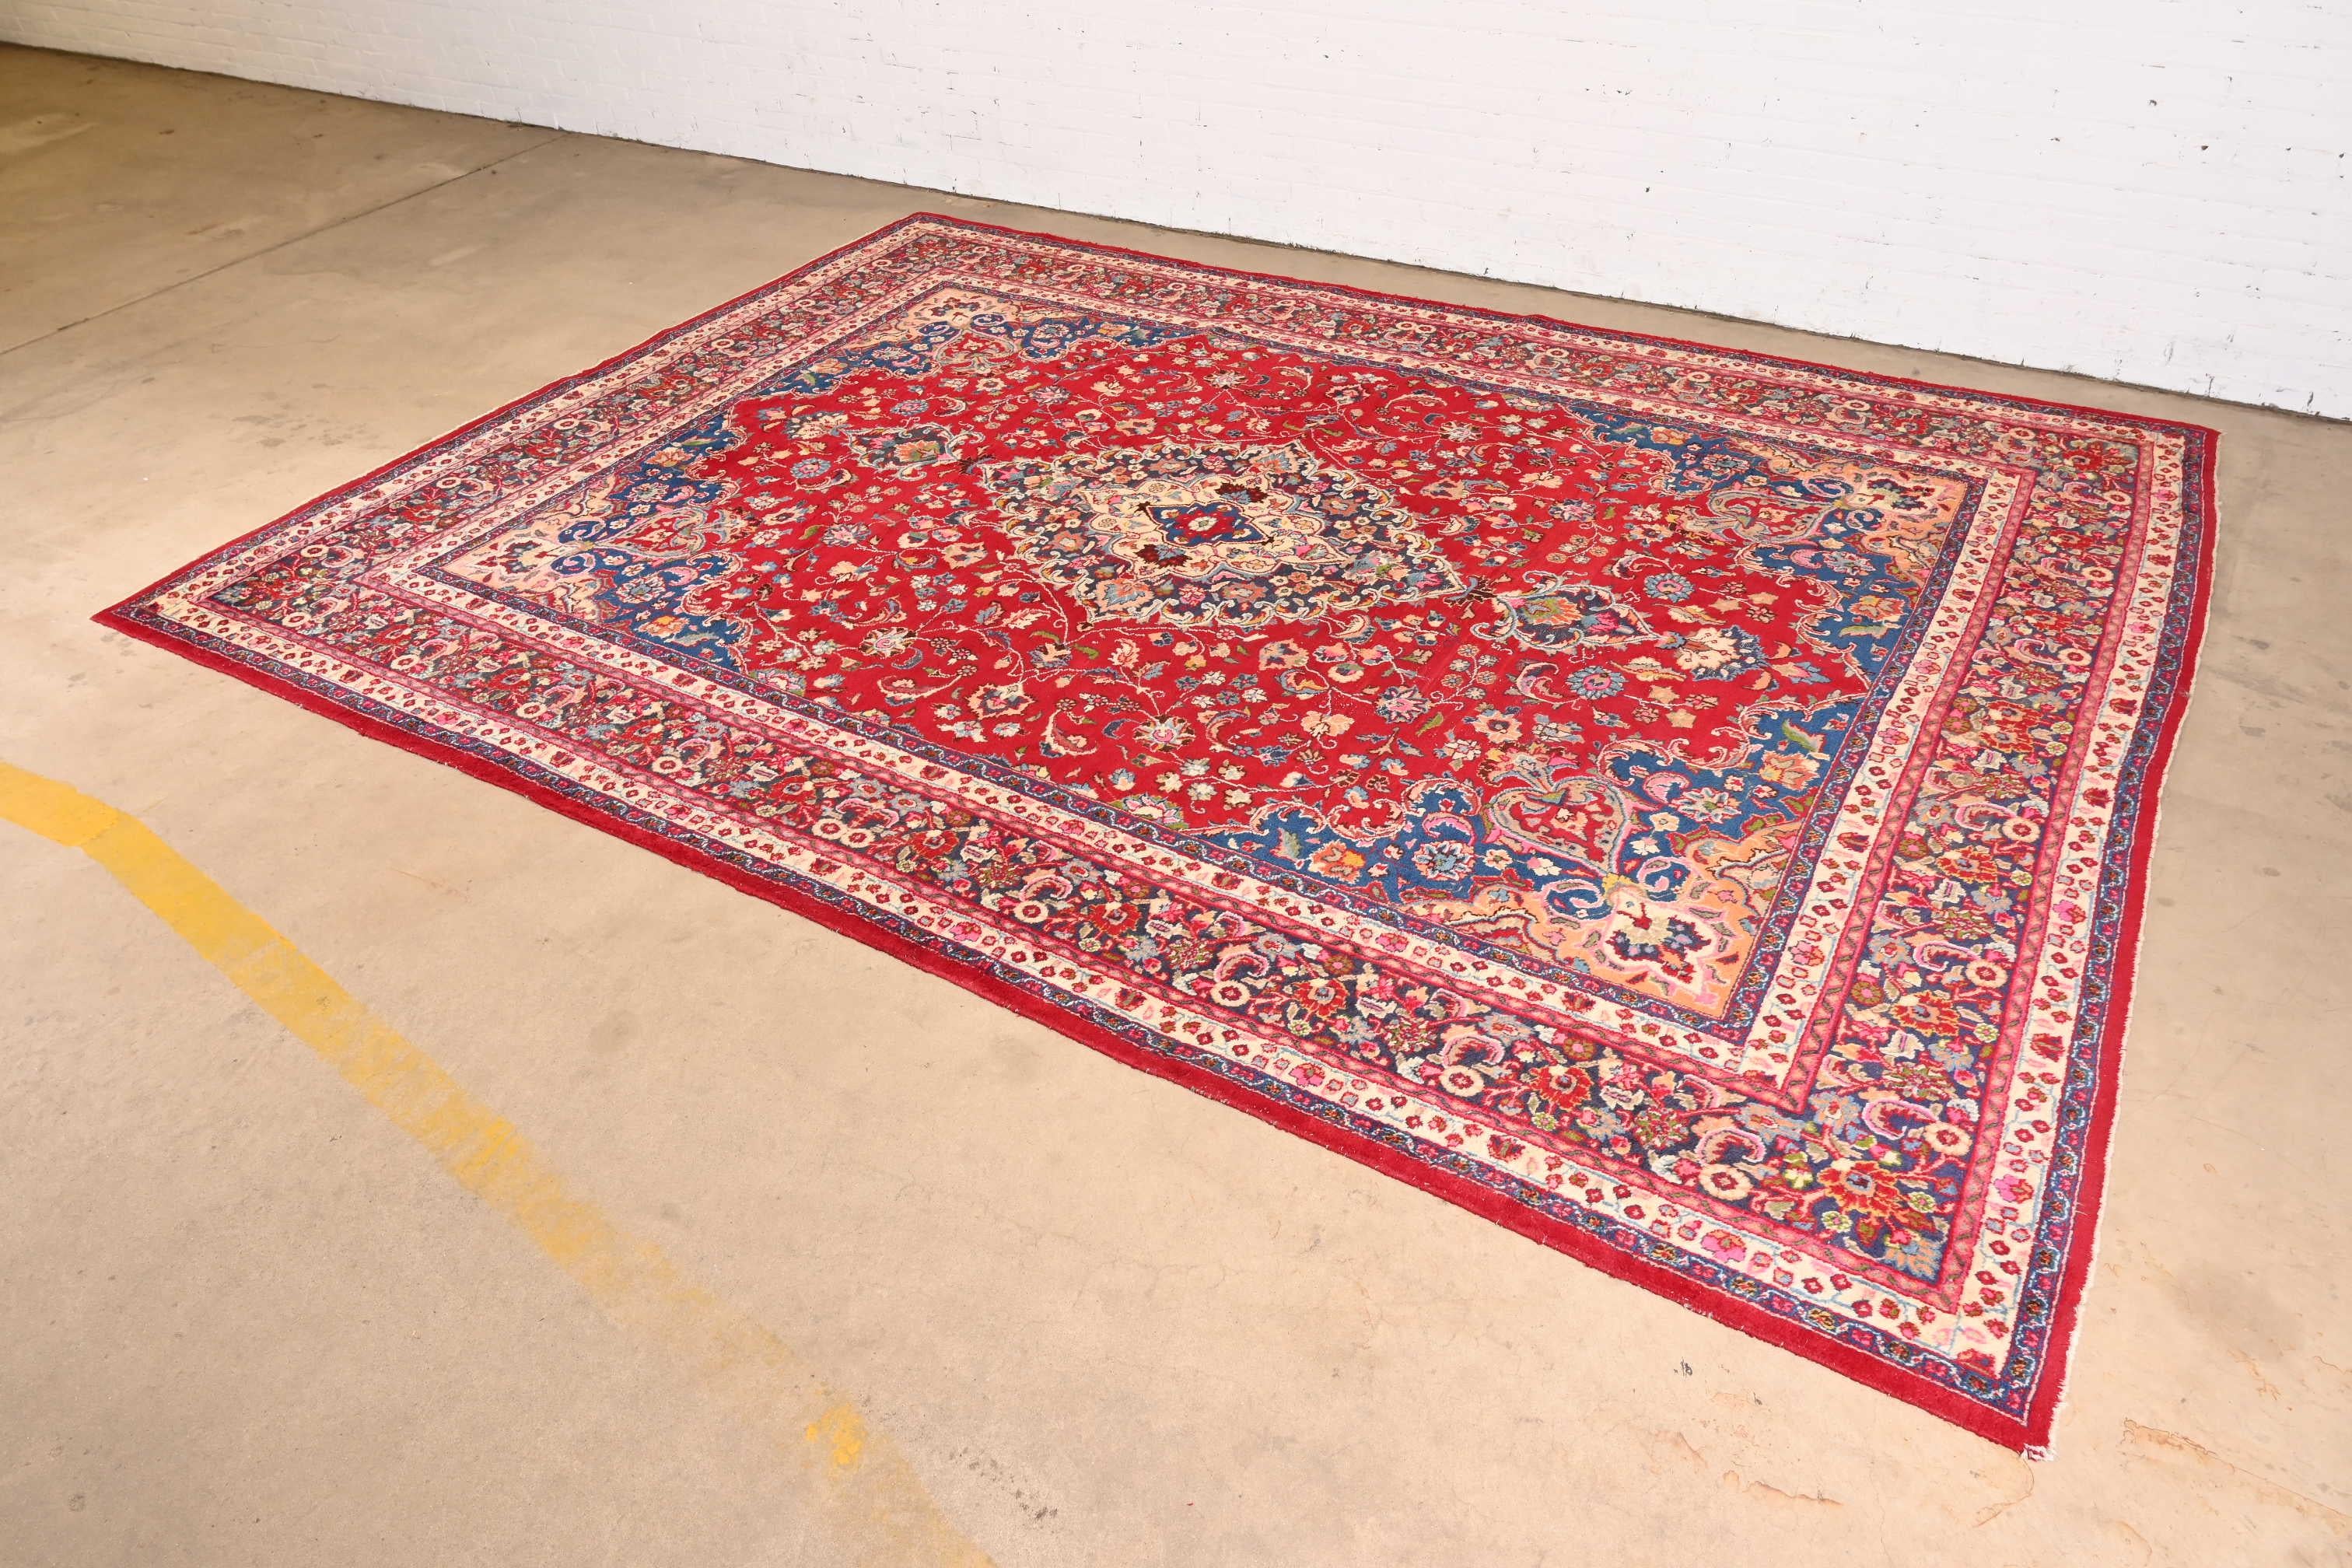 A gorgeous vintage hand-knotted Persian Tabriz room size wool rug

Mid-20th Century

Classic design, with floral sprays and bouquets. Predominant colors in red, blue, pink, and ivory.

Measures: 9